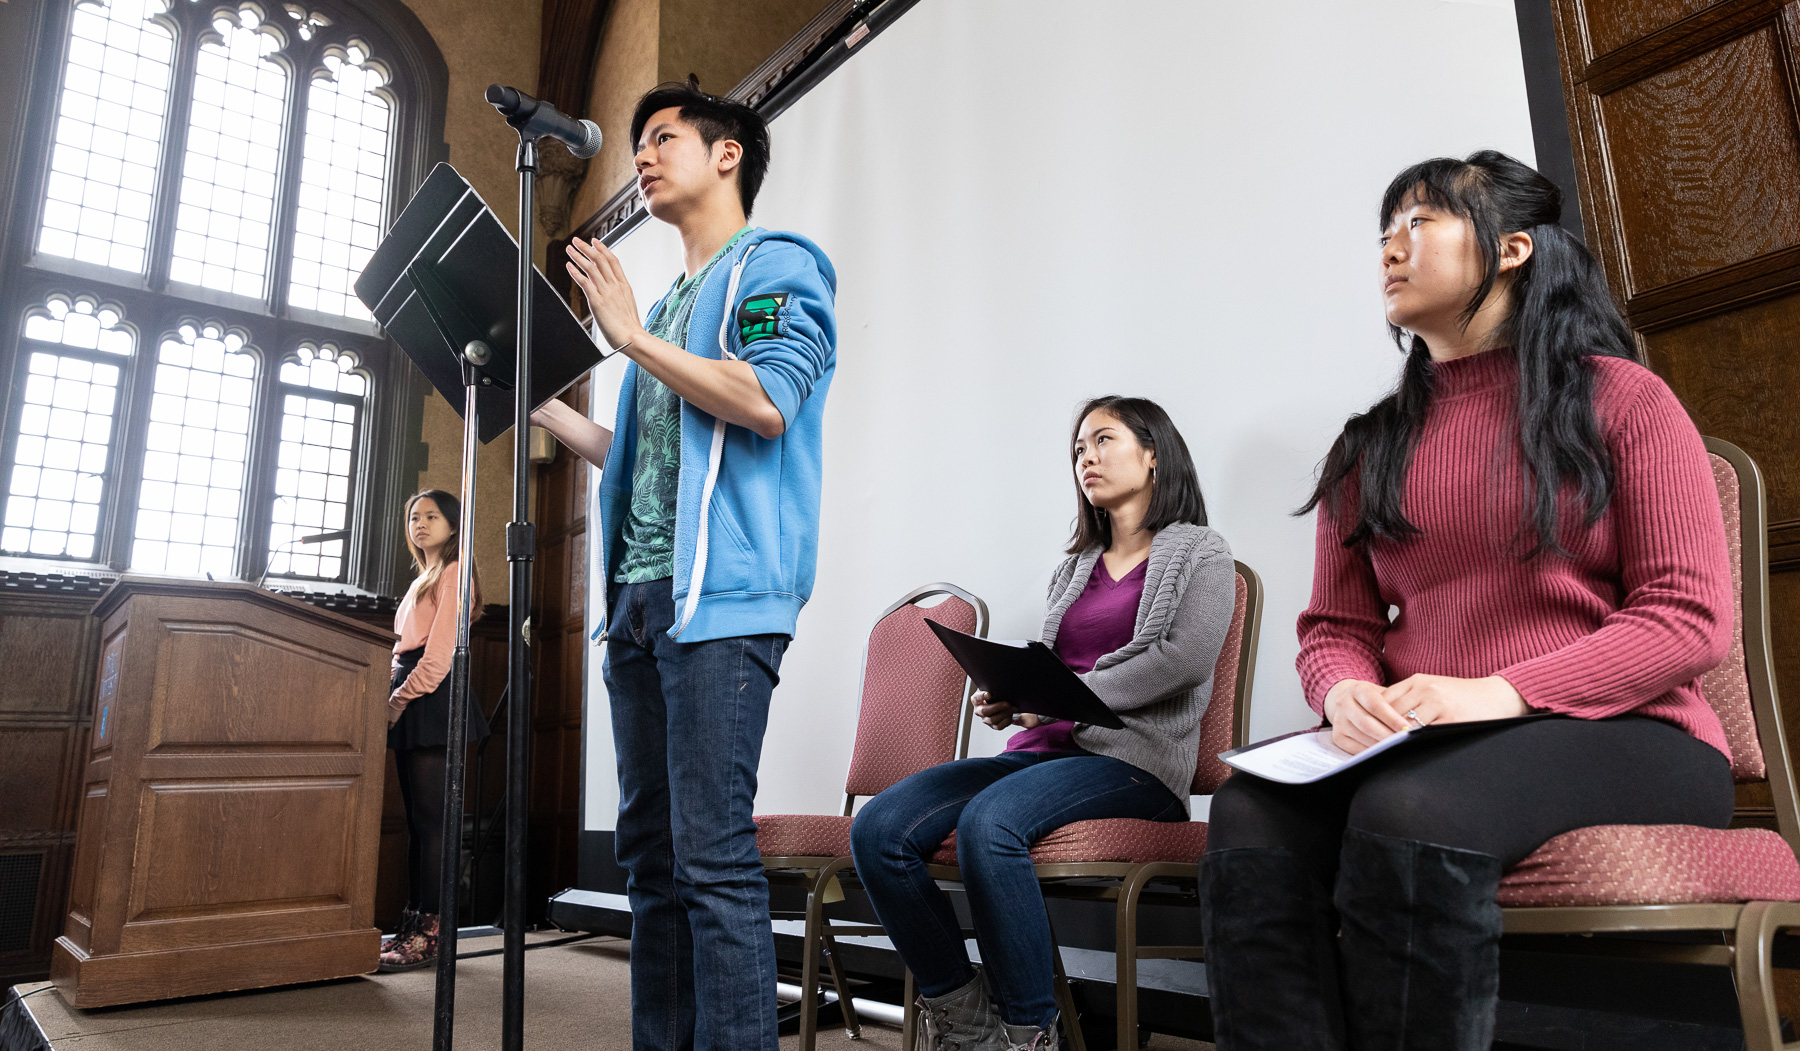 Left to right, Isabelle Cheng, Johnny Tran, Carolyn Hu-Bradbury, and Harmony Zhang, students in The Theatre School, performed “Asian Voices” during the event. (DePaul University/Jeff Carrion)